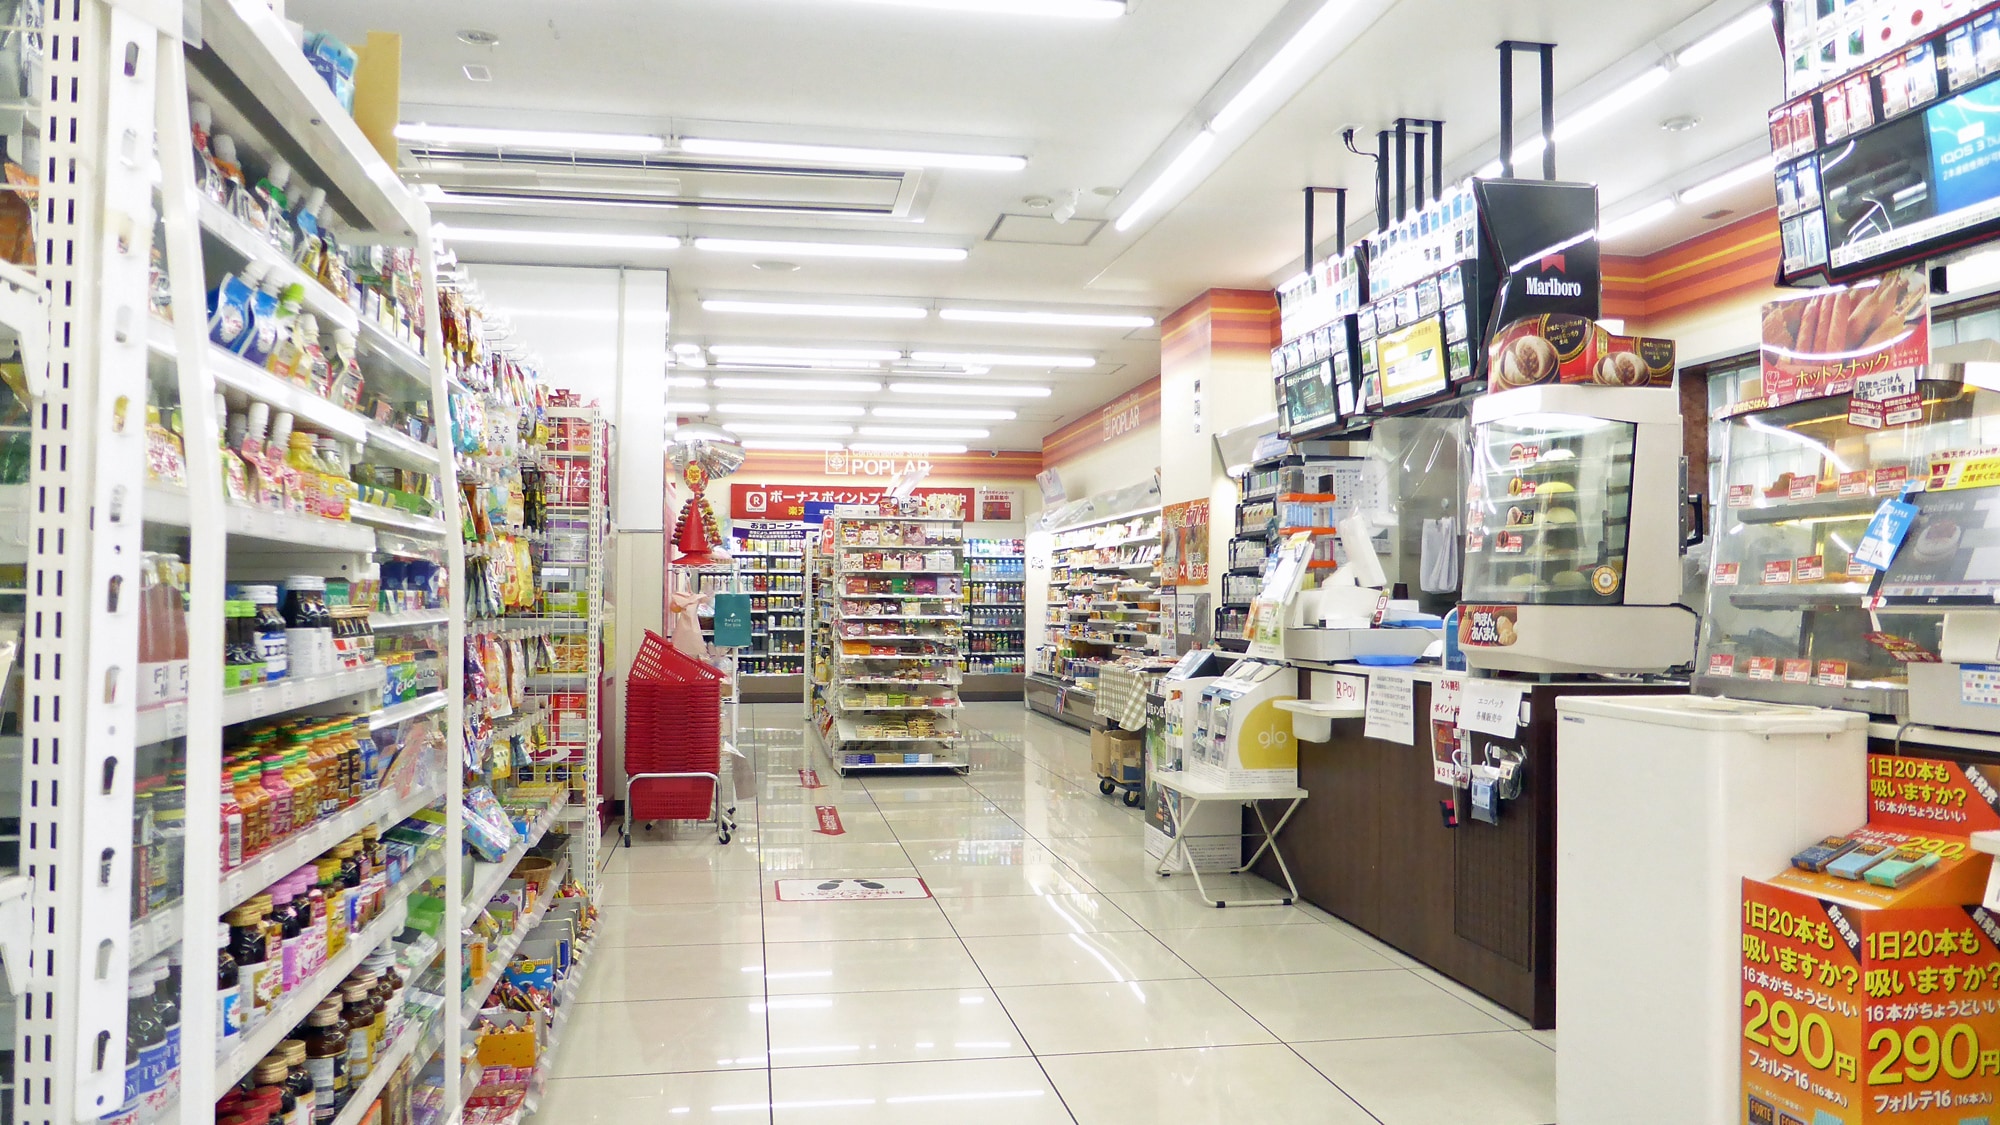 [Convenience store] Convenient because it is directly connected to the lobby.